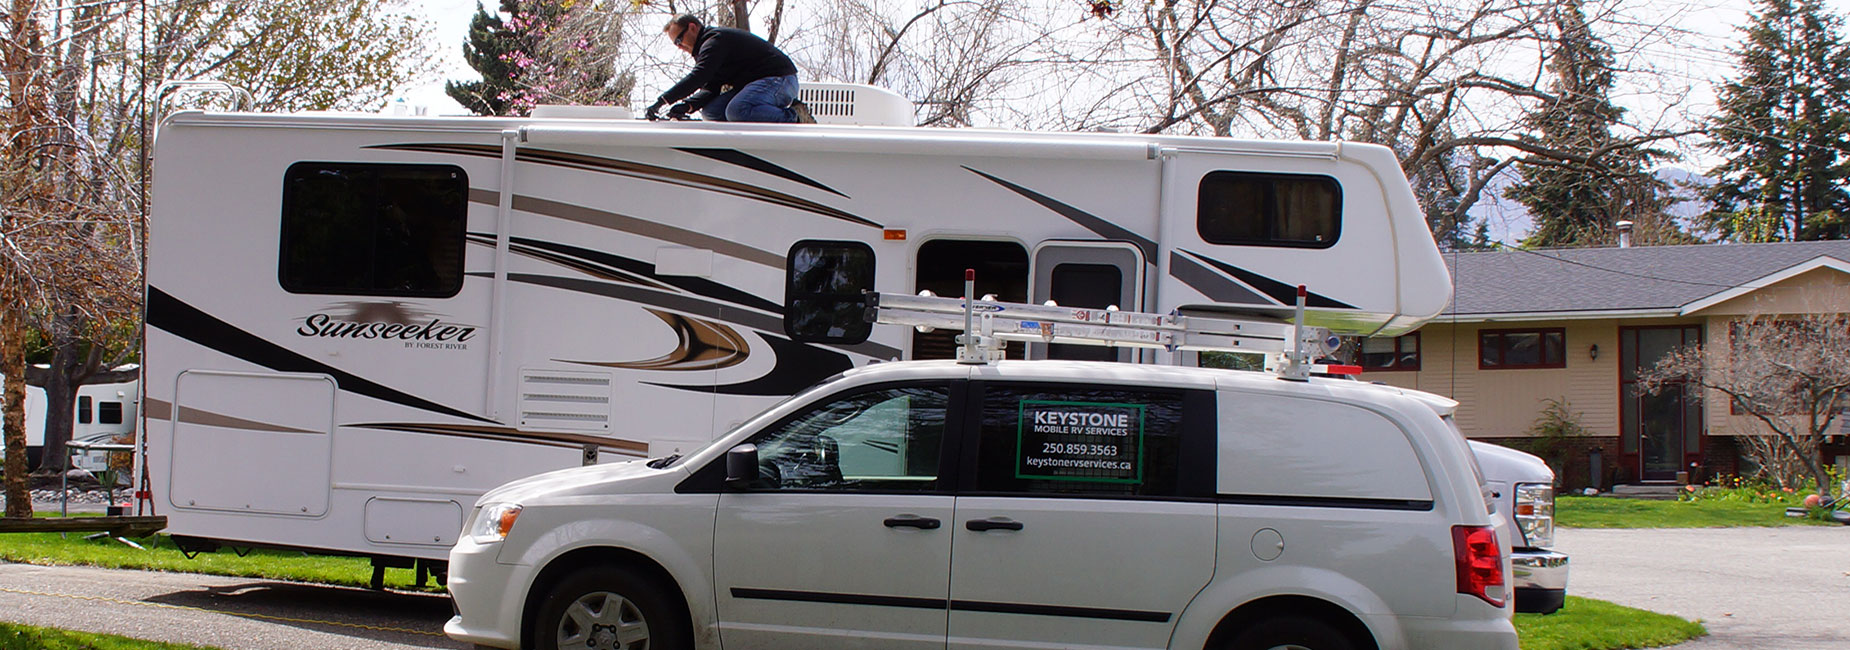 About Keystone RV Services, repairing and servicing all makes and models of RV's in and around the Kelowna area.